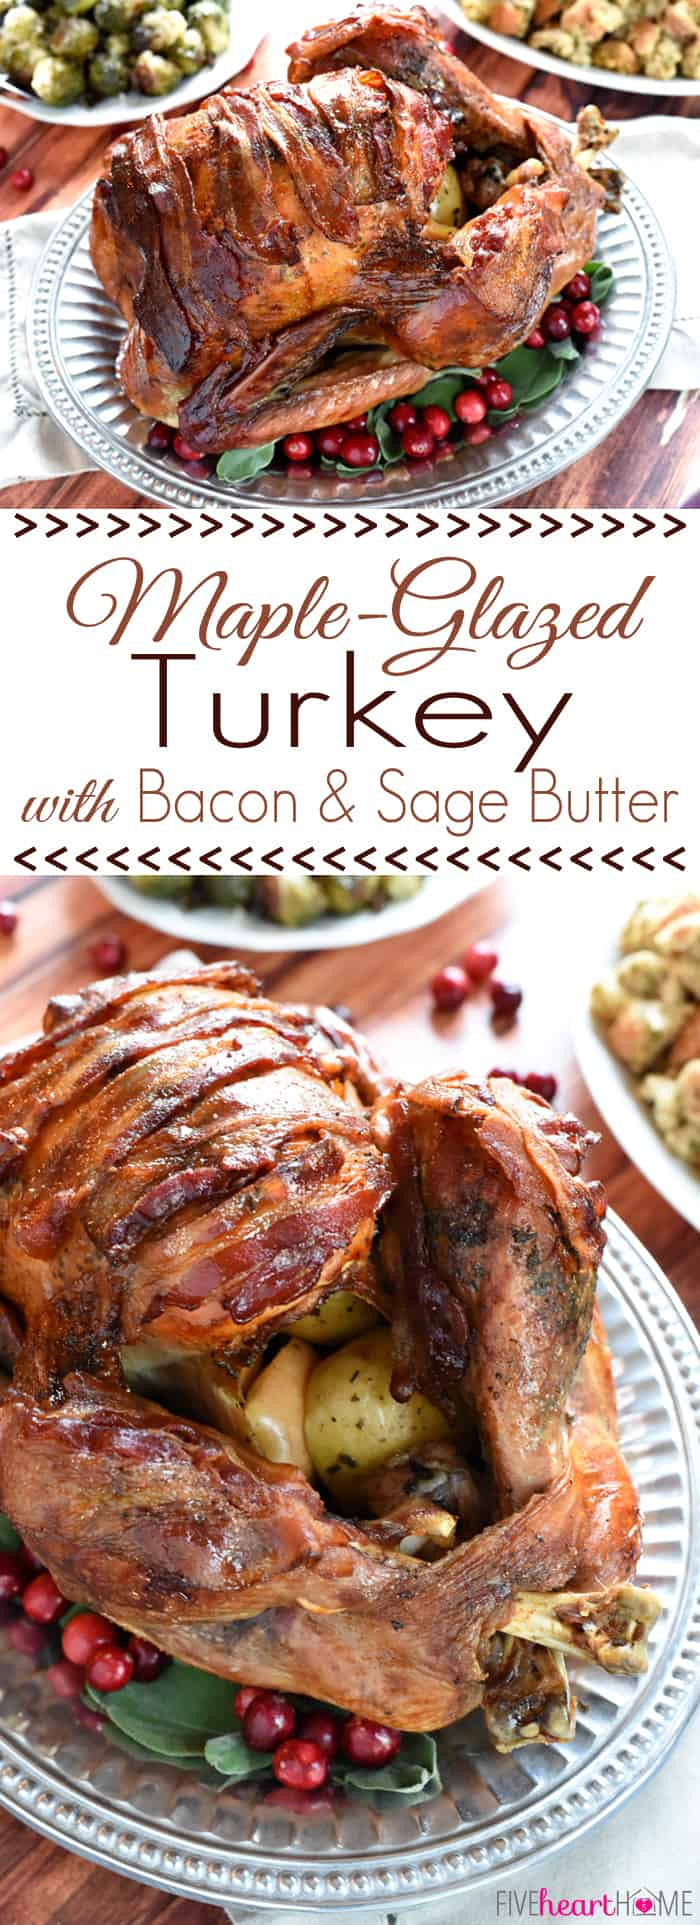 Thanksgiving Turkey With Bacon
 Maple Glazed Turkey with Bacon and Sage Butter